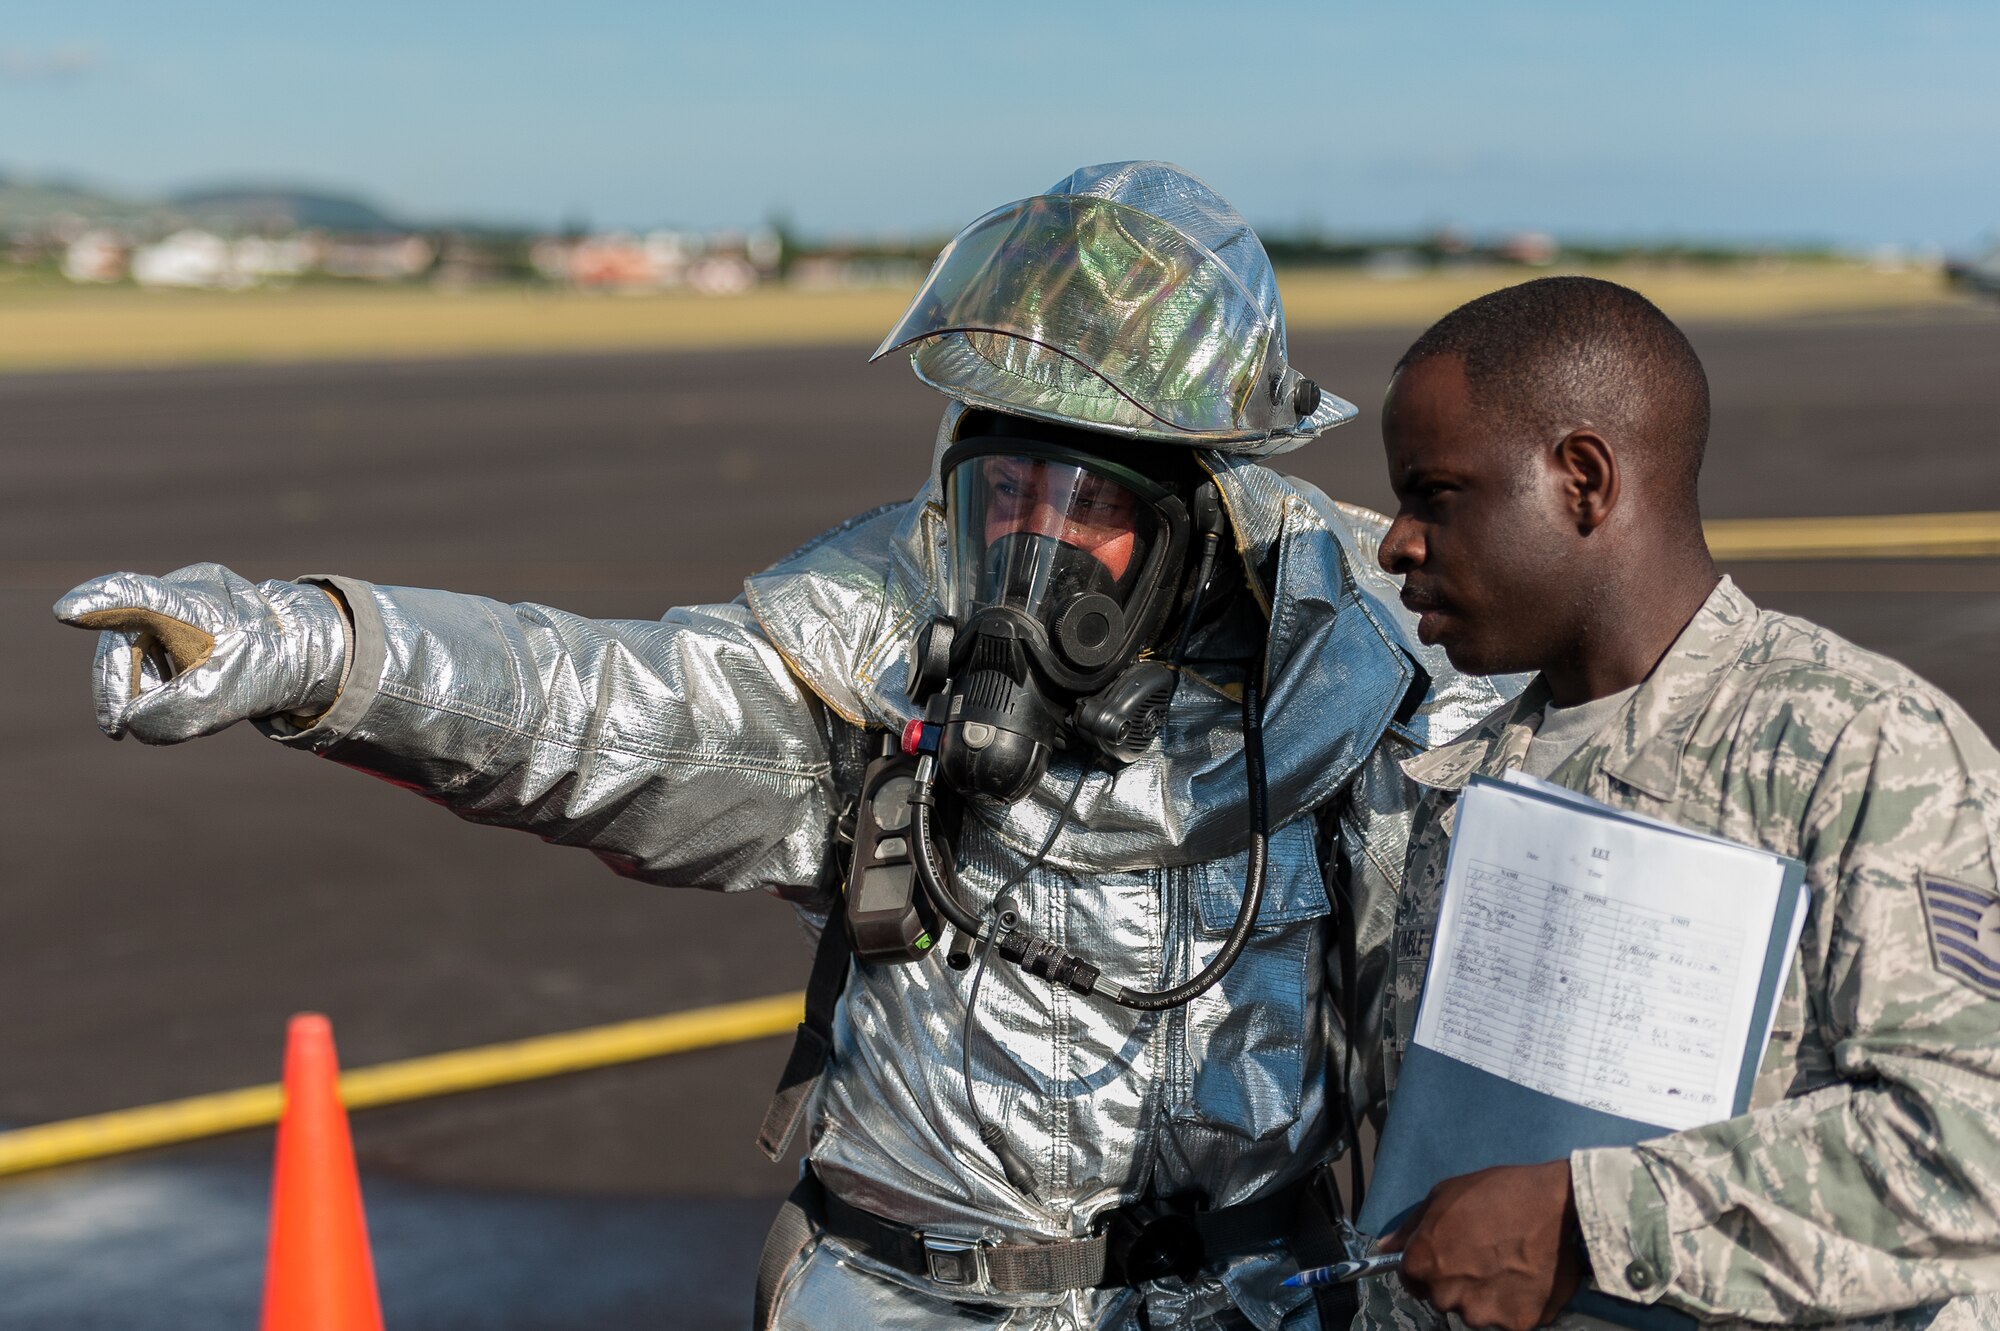 Dimas Martins, 65th Civil Engineer Squadron firefighter explains his evacuation procedure plan with Tech. Sgt. Floydzell Kimble, 65th CES exercise evaluator, during a joint exercise at Lajes Field, July 30 2012.  Lajes Airmen and their Portuguese partner’s exercised solidarity as they put into practice emergency procedures for a downed aircraft prior to the upcoming Open House on Aug.  5th. (Photo by Lucas Silva)